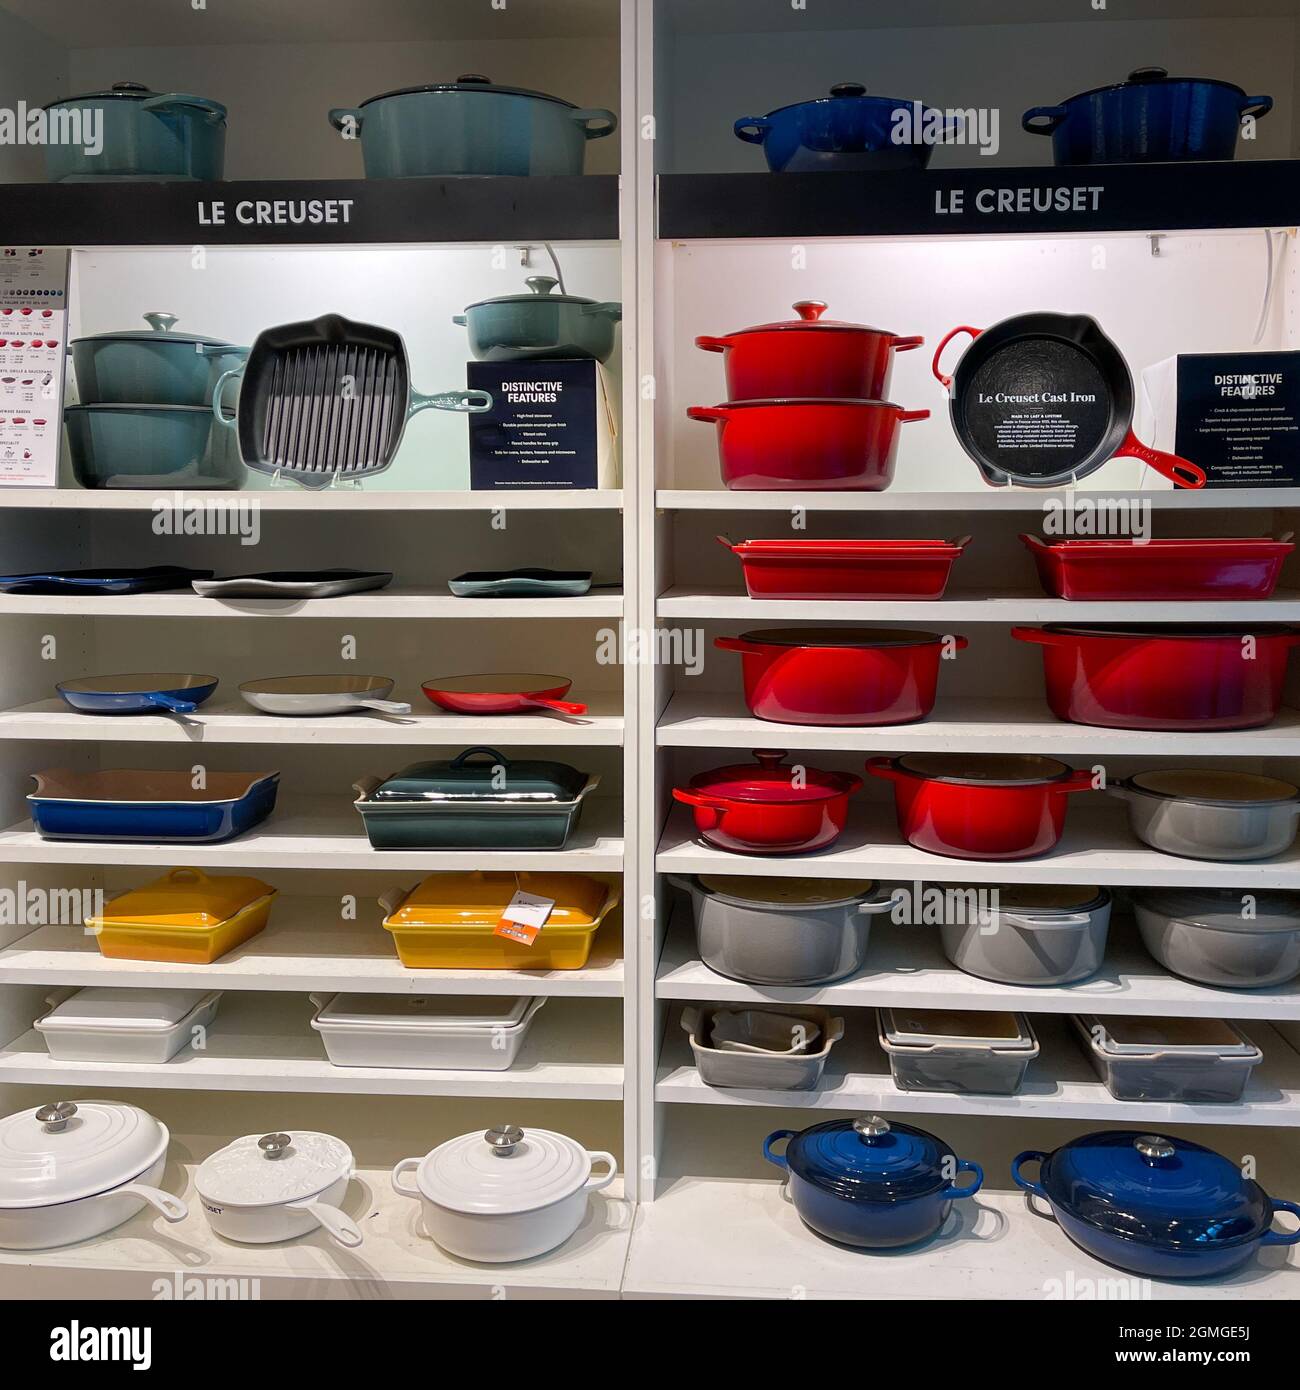 https://c8.alamy.com/comp/2GMGE5J/orlando-fl-usa-september-9-2021-the-le-creuset-pot-and-pan-aisle-at-a-williams-sonoma-store-at-an-indoor-mall-in-orlando-florida-2GMGE5J.jpg